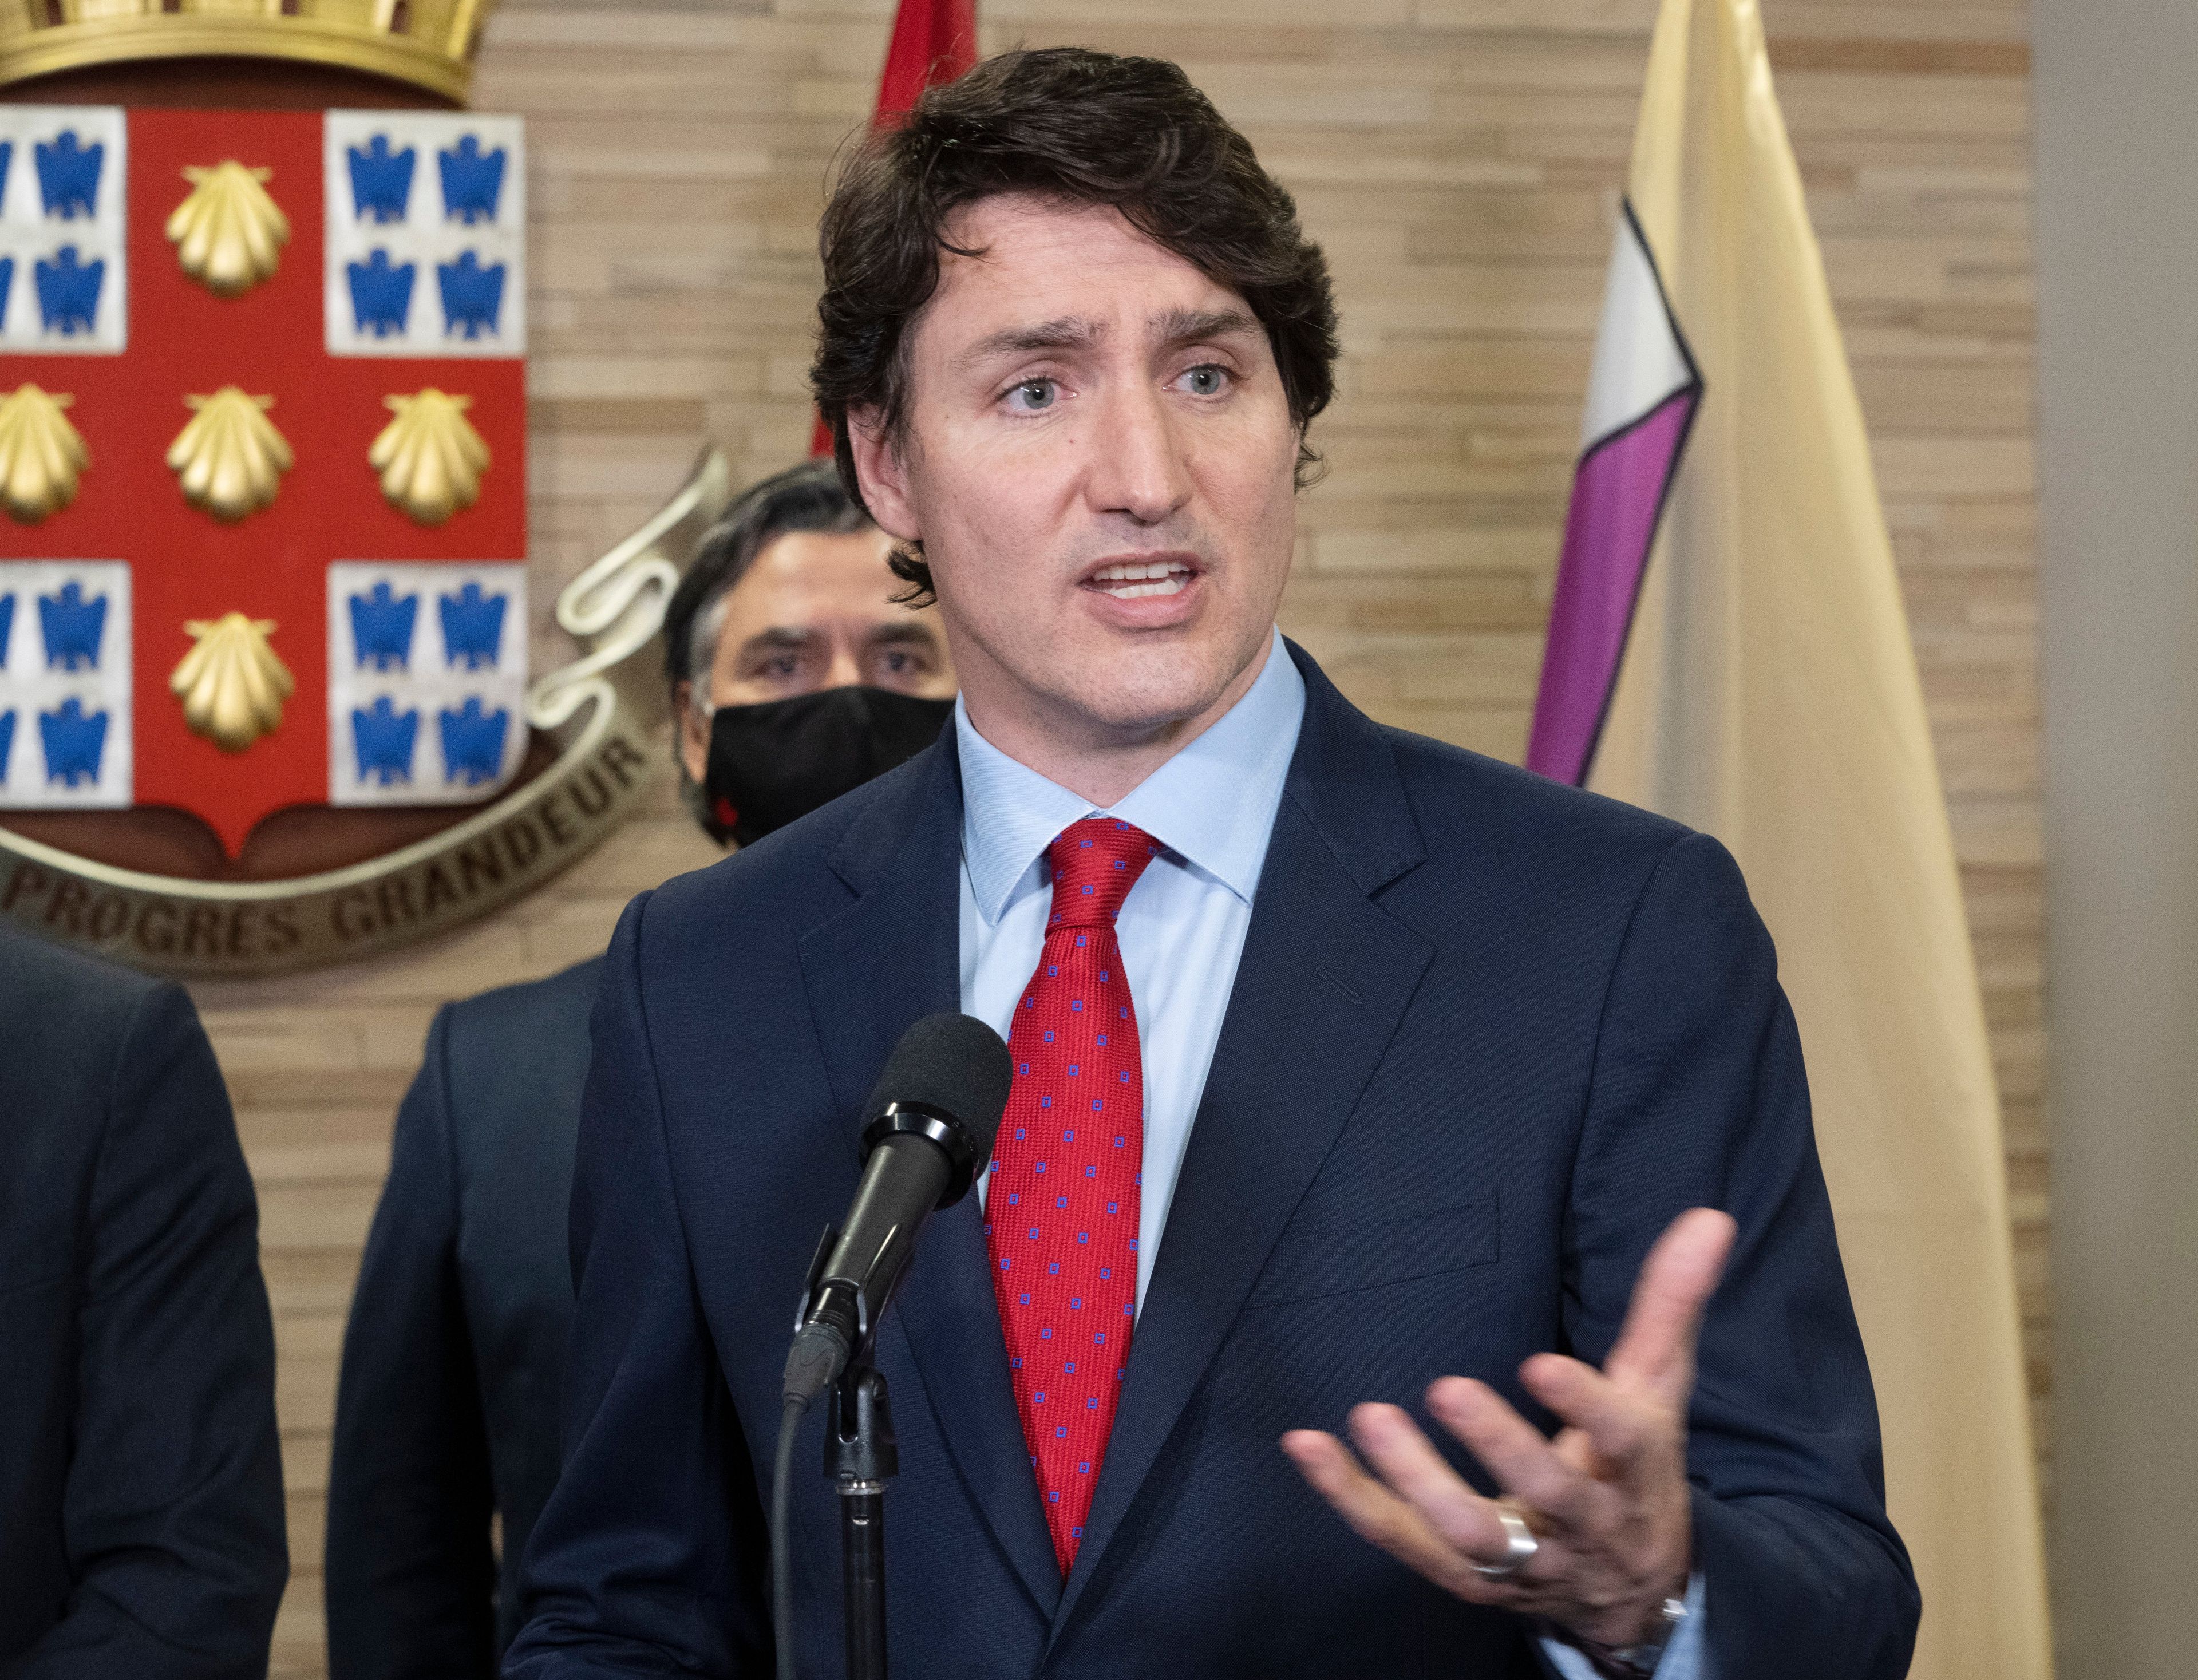 Trudeau speaks to the media during a news conference, April 13, 2022 in Laval, Que. (Ryan Remiorz/The Canadian Press)